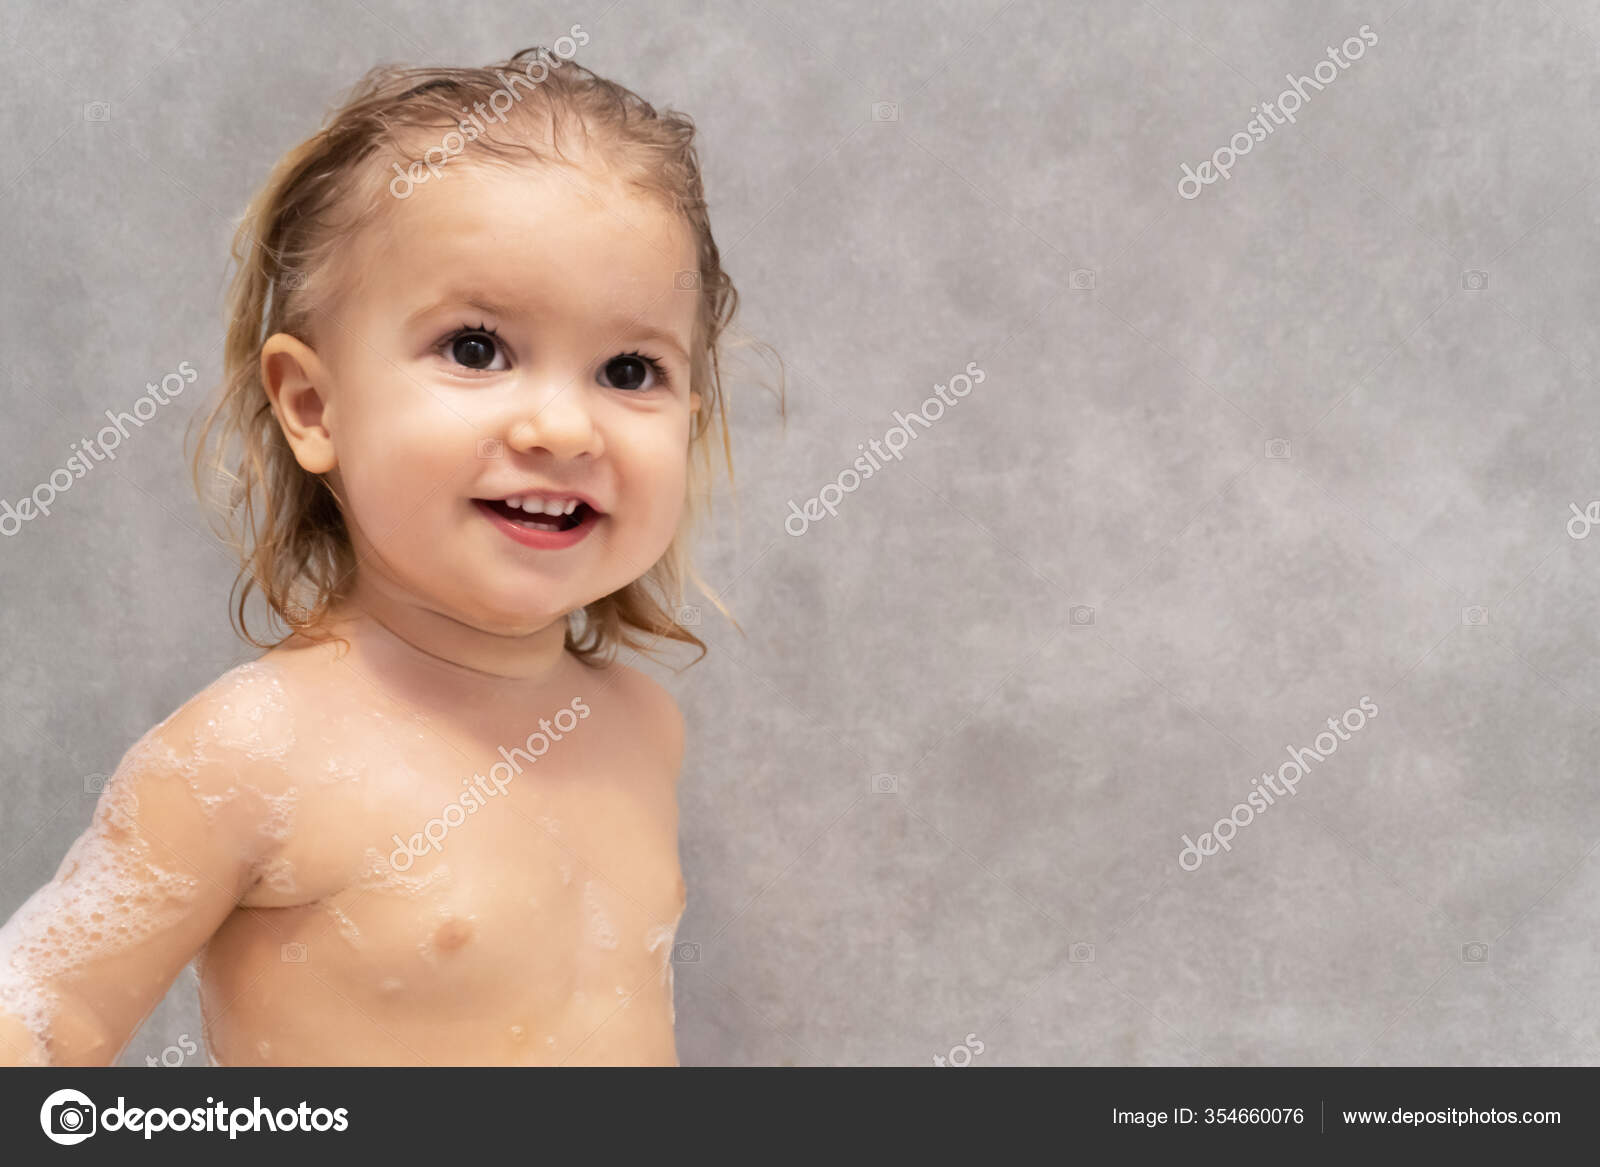 kid girl naked Getty Images